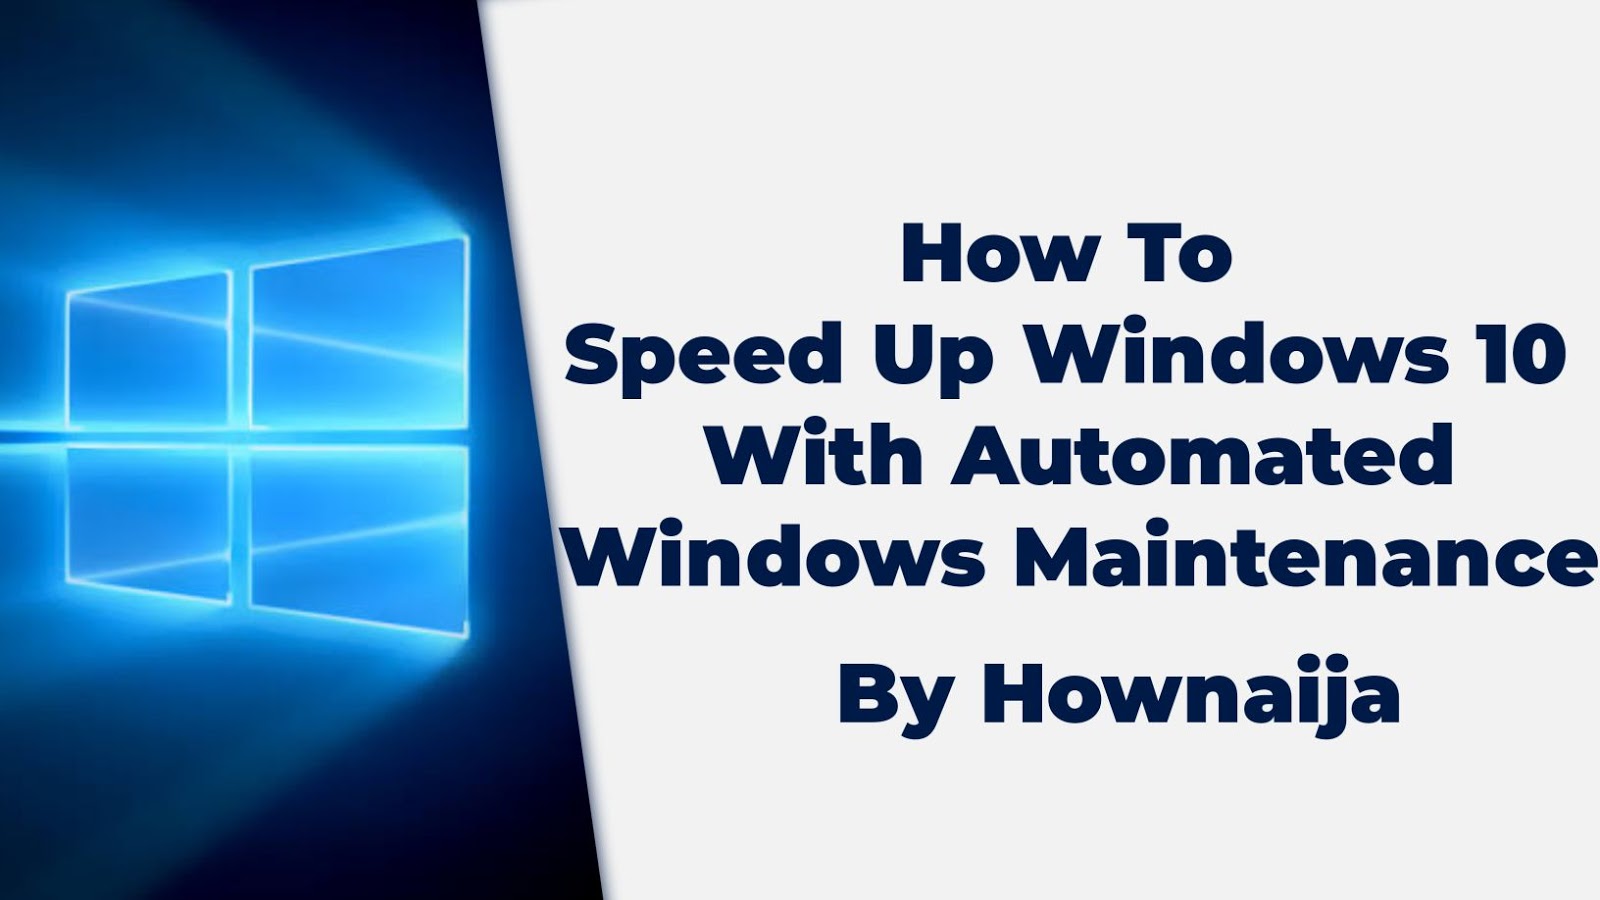 How To Speed Up Windows 10 With Automated Windows Maintenance